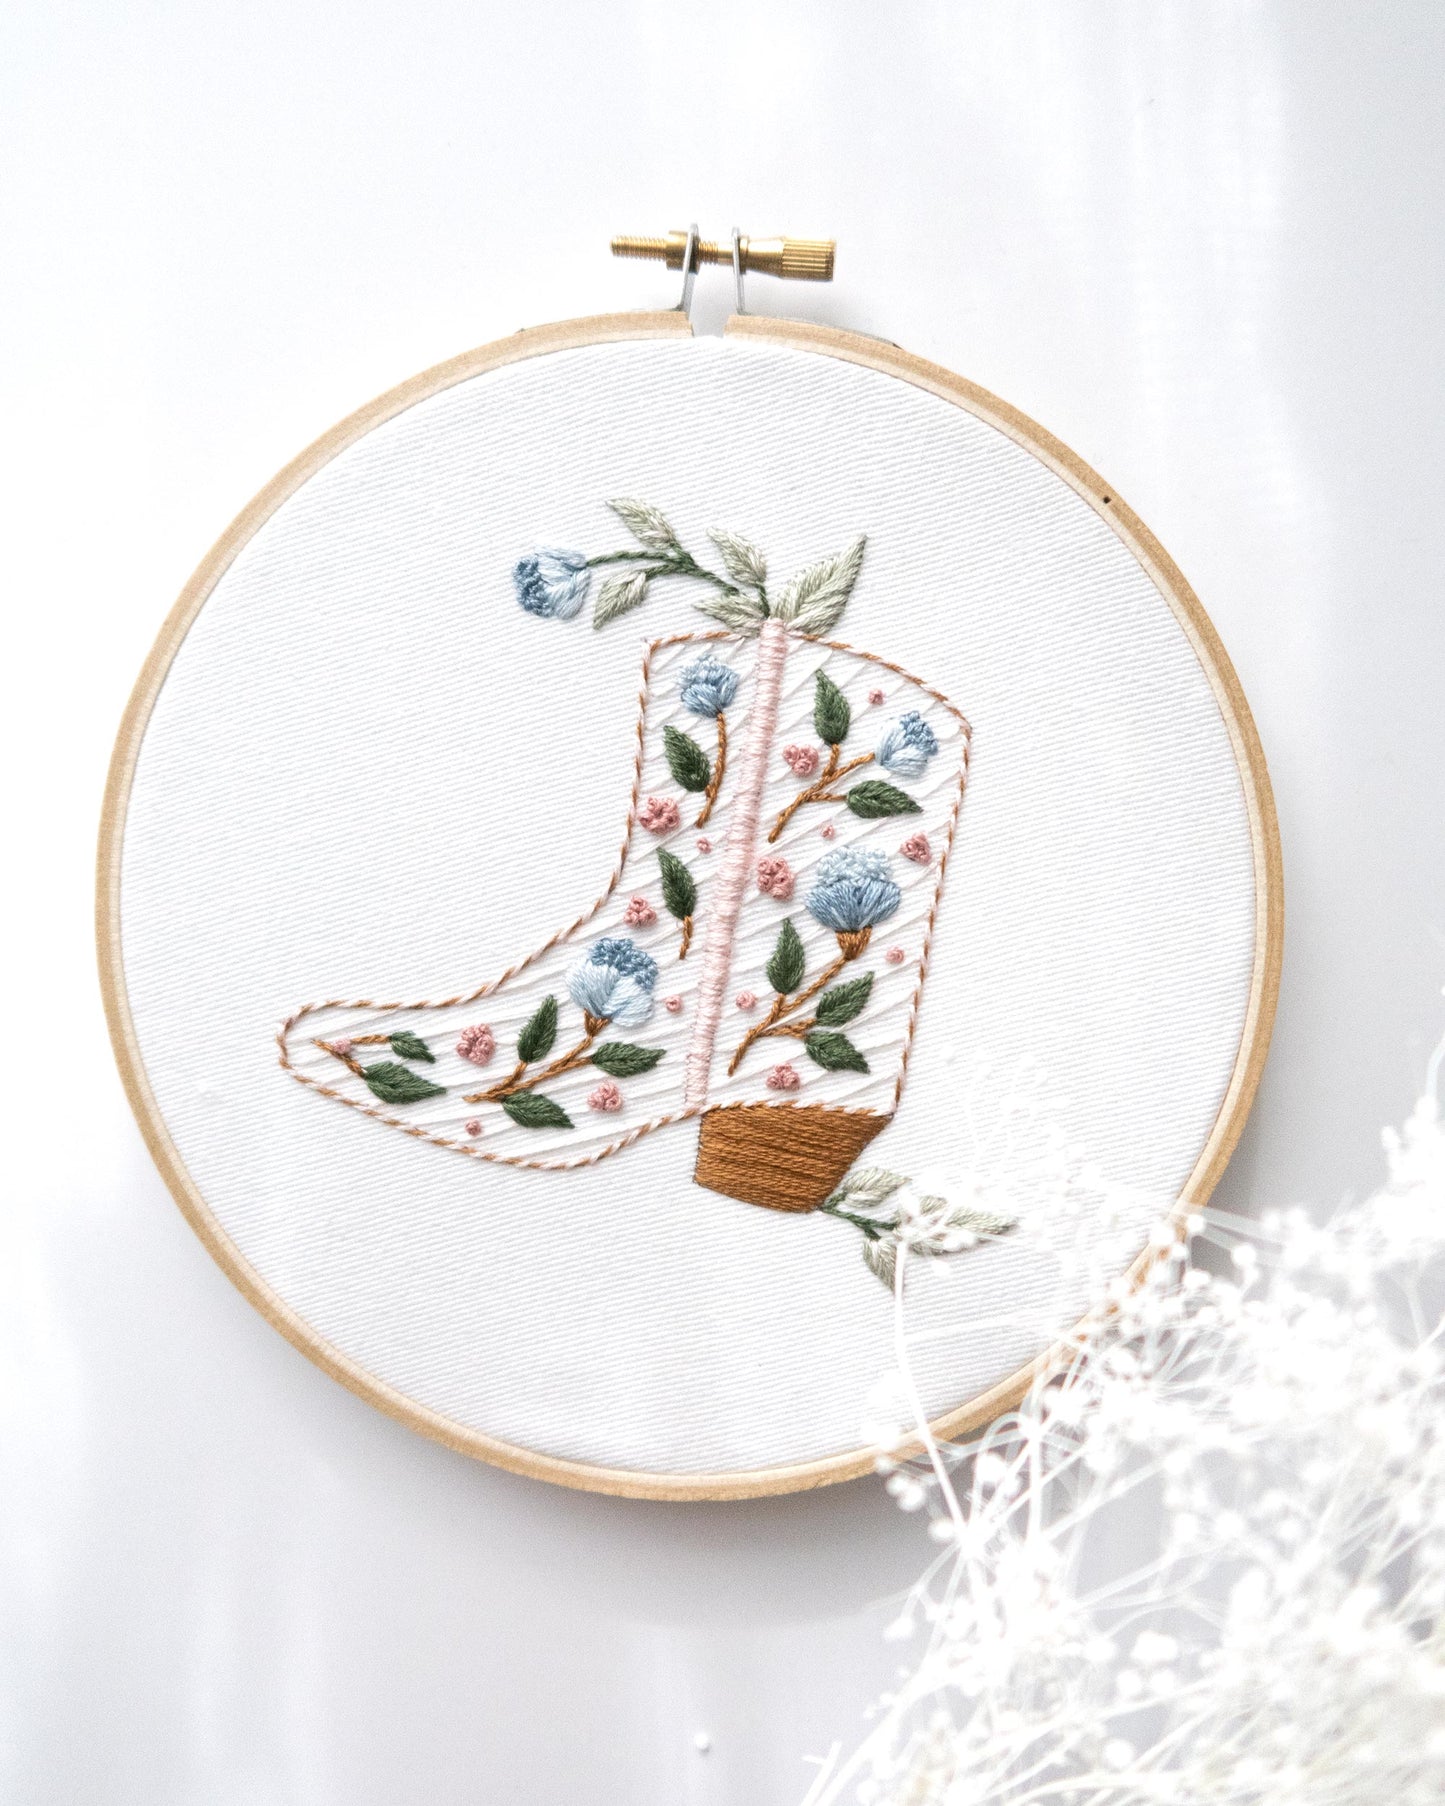 Floral cowboy boot hand embroidery kit with pink and blue flowers and light green leaves 